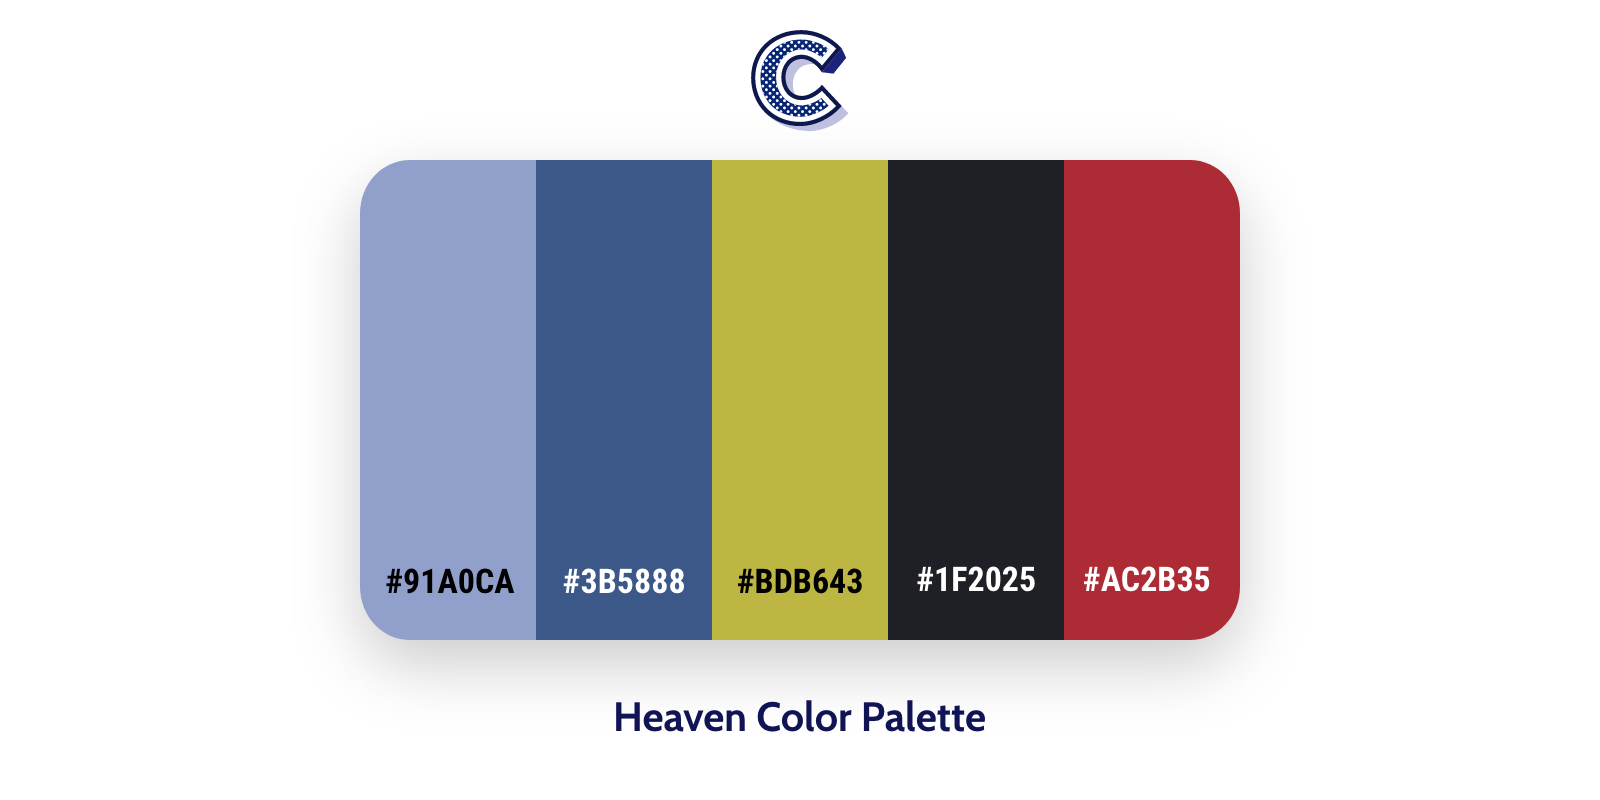 the featured image of heaven color palette